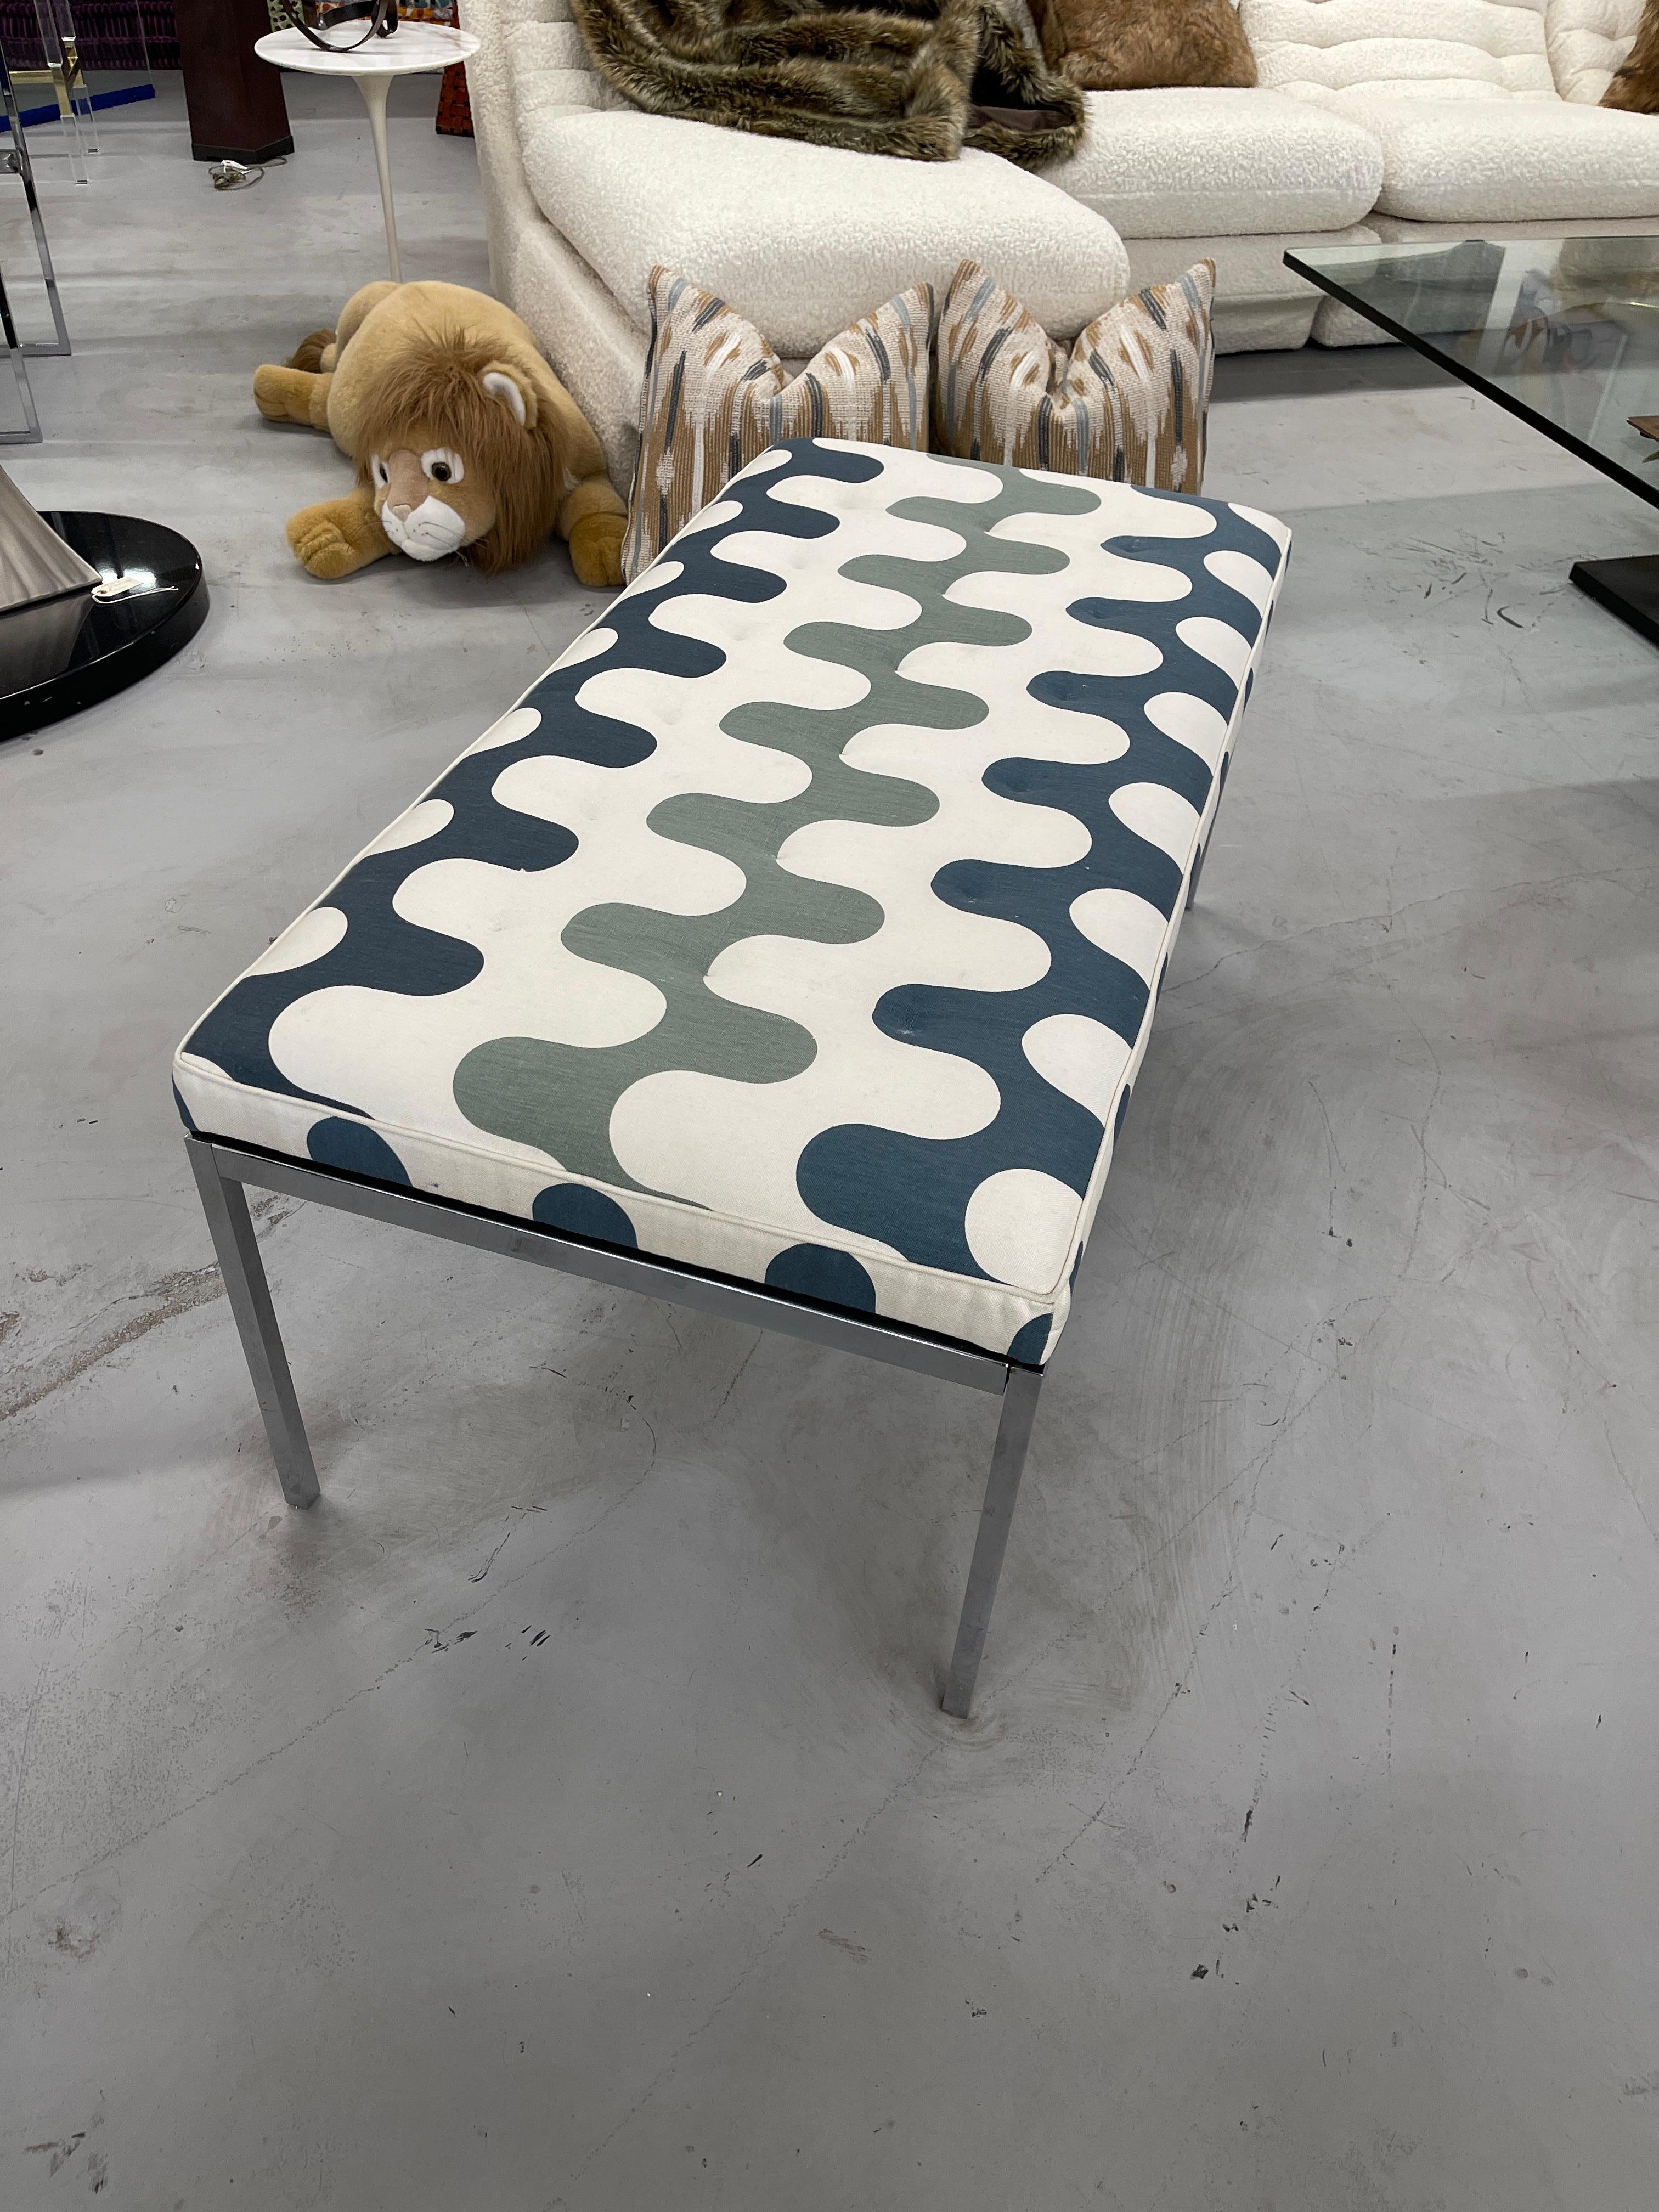 A vintage Florence Knoll bench purchased out of a local Palm Springs estate. It had been nicely reupholstered and we liked the fabric and left it. The bench is in good age appropriate condition, please see the detailed photos. Minor marks to the